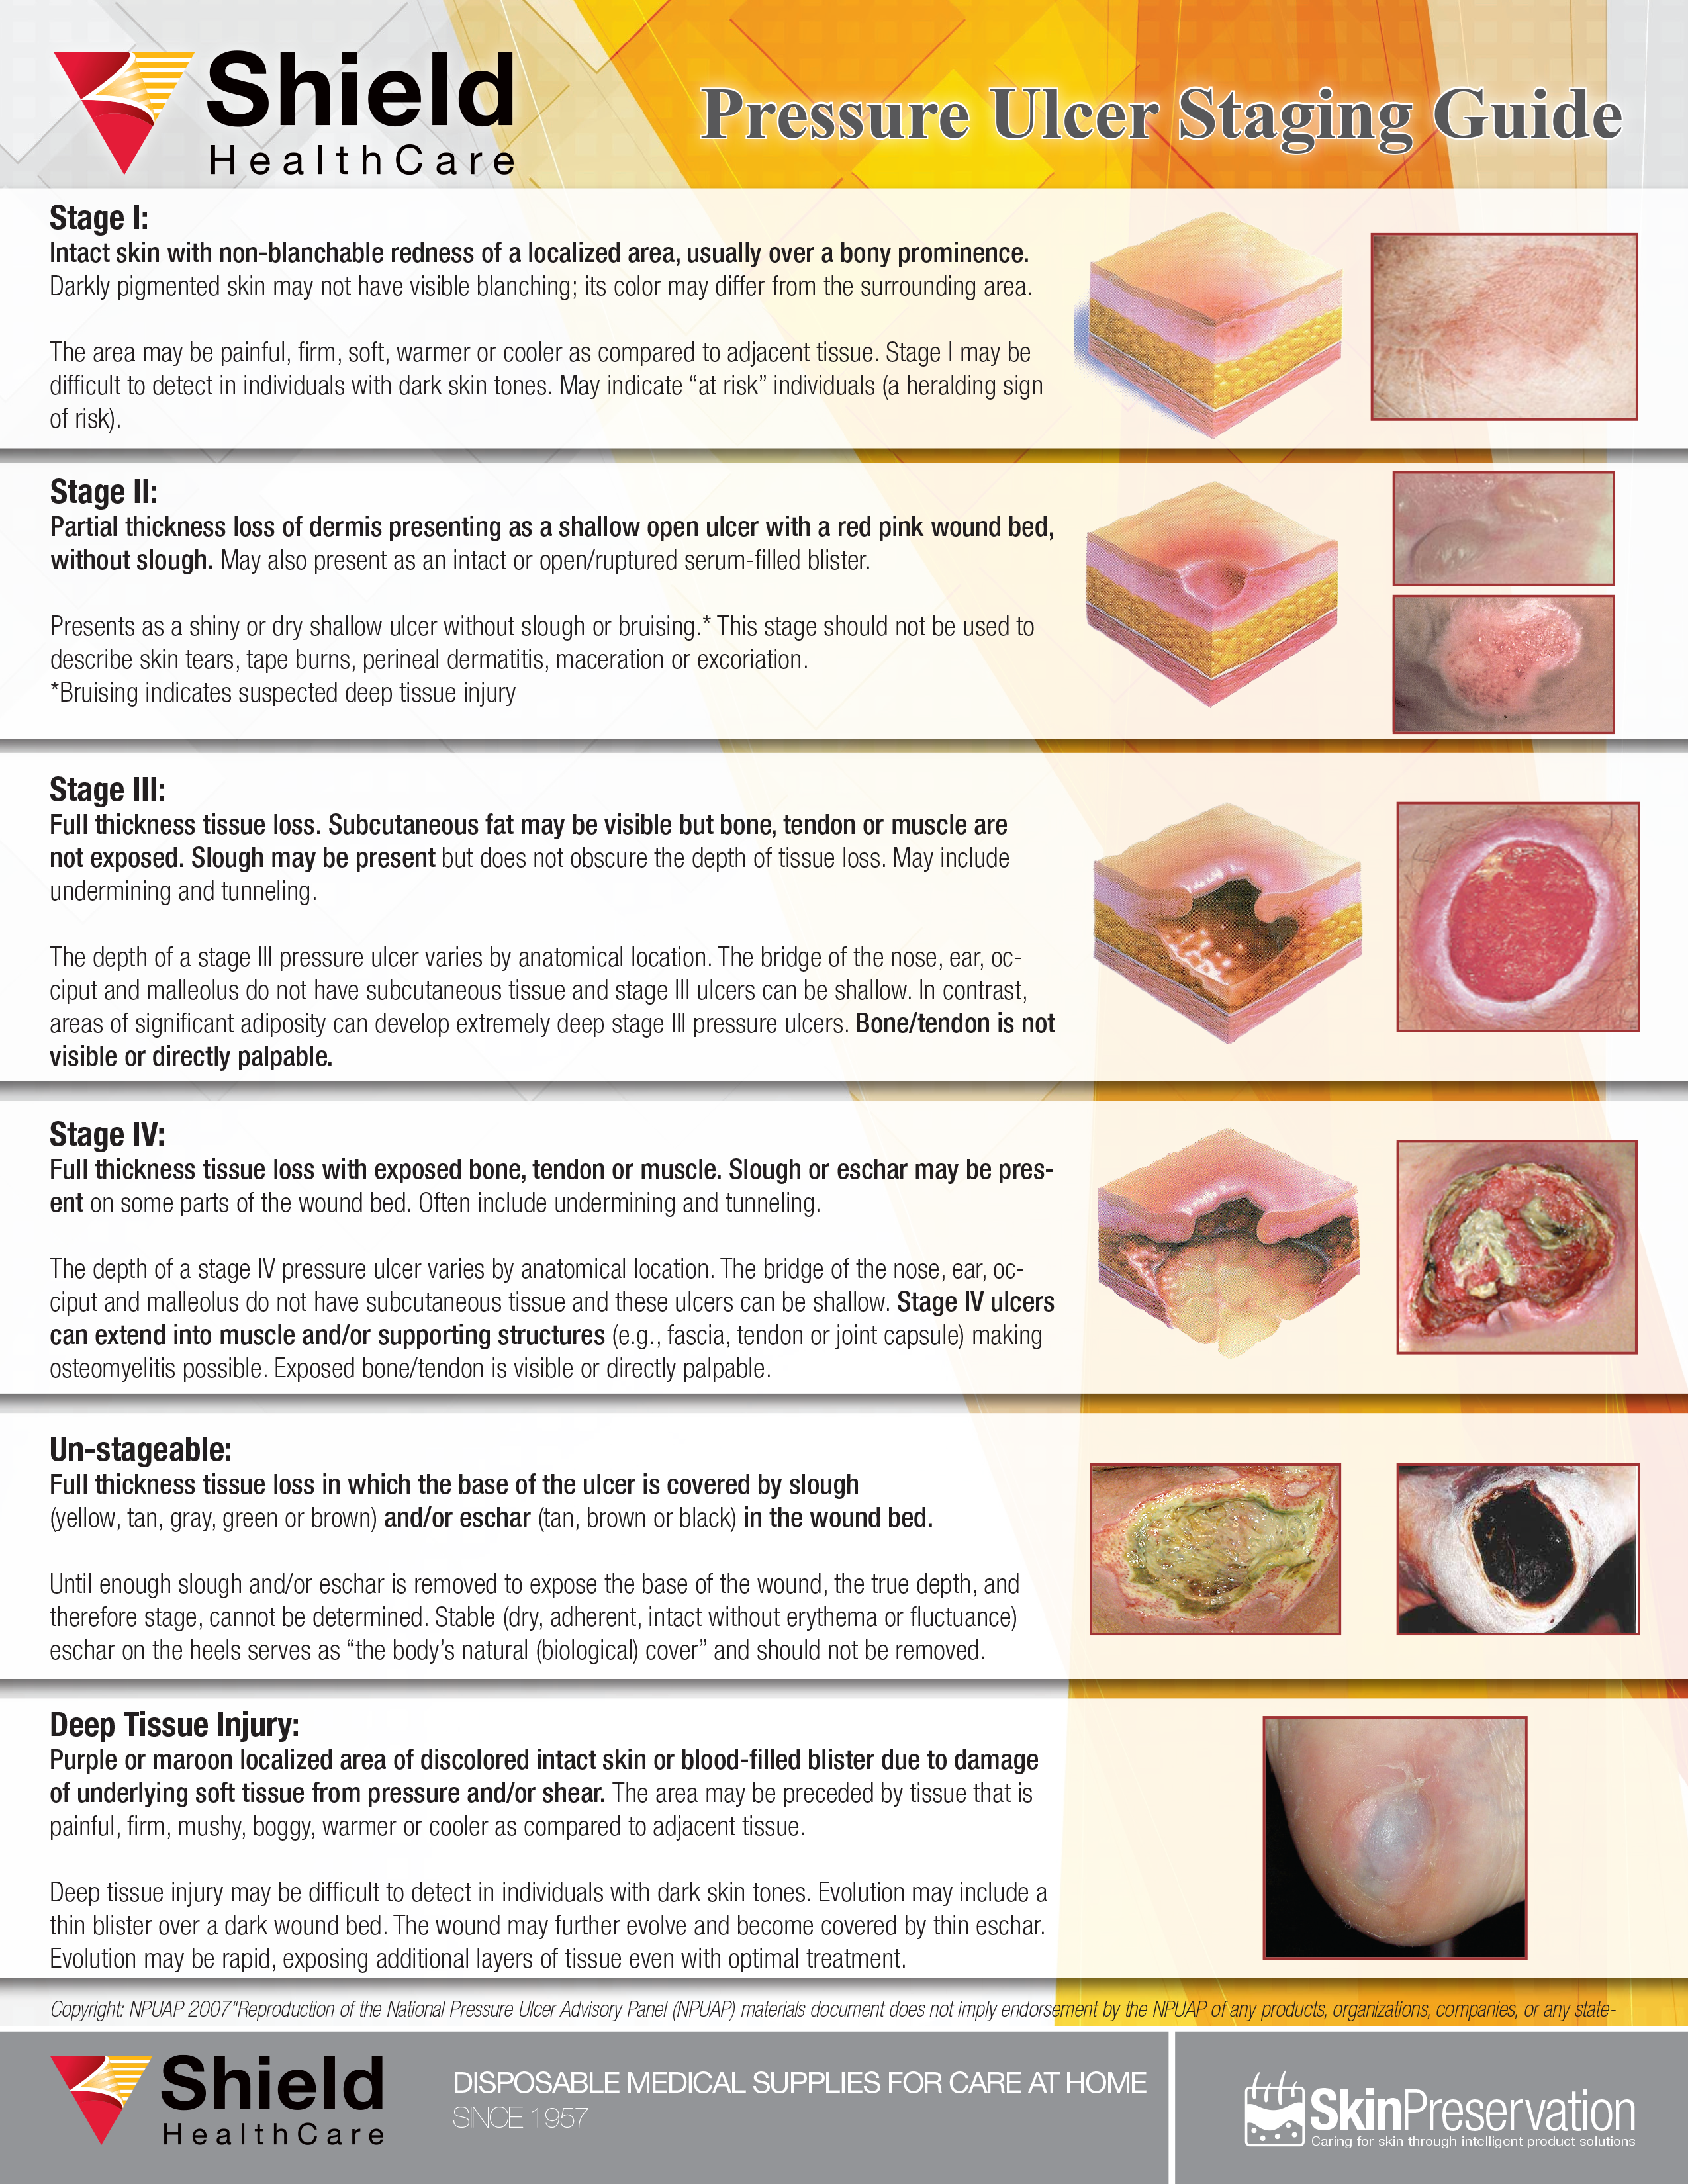 Pressure Injuries (Pressure Ulcers) and Wound Care